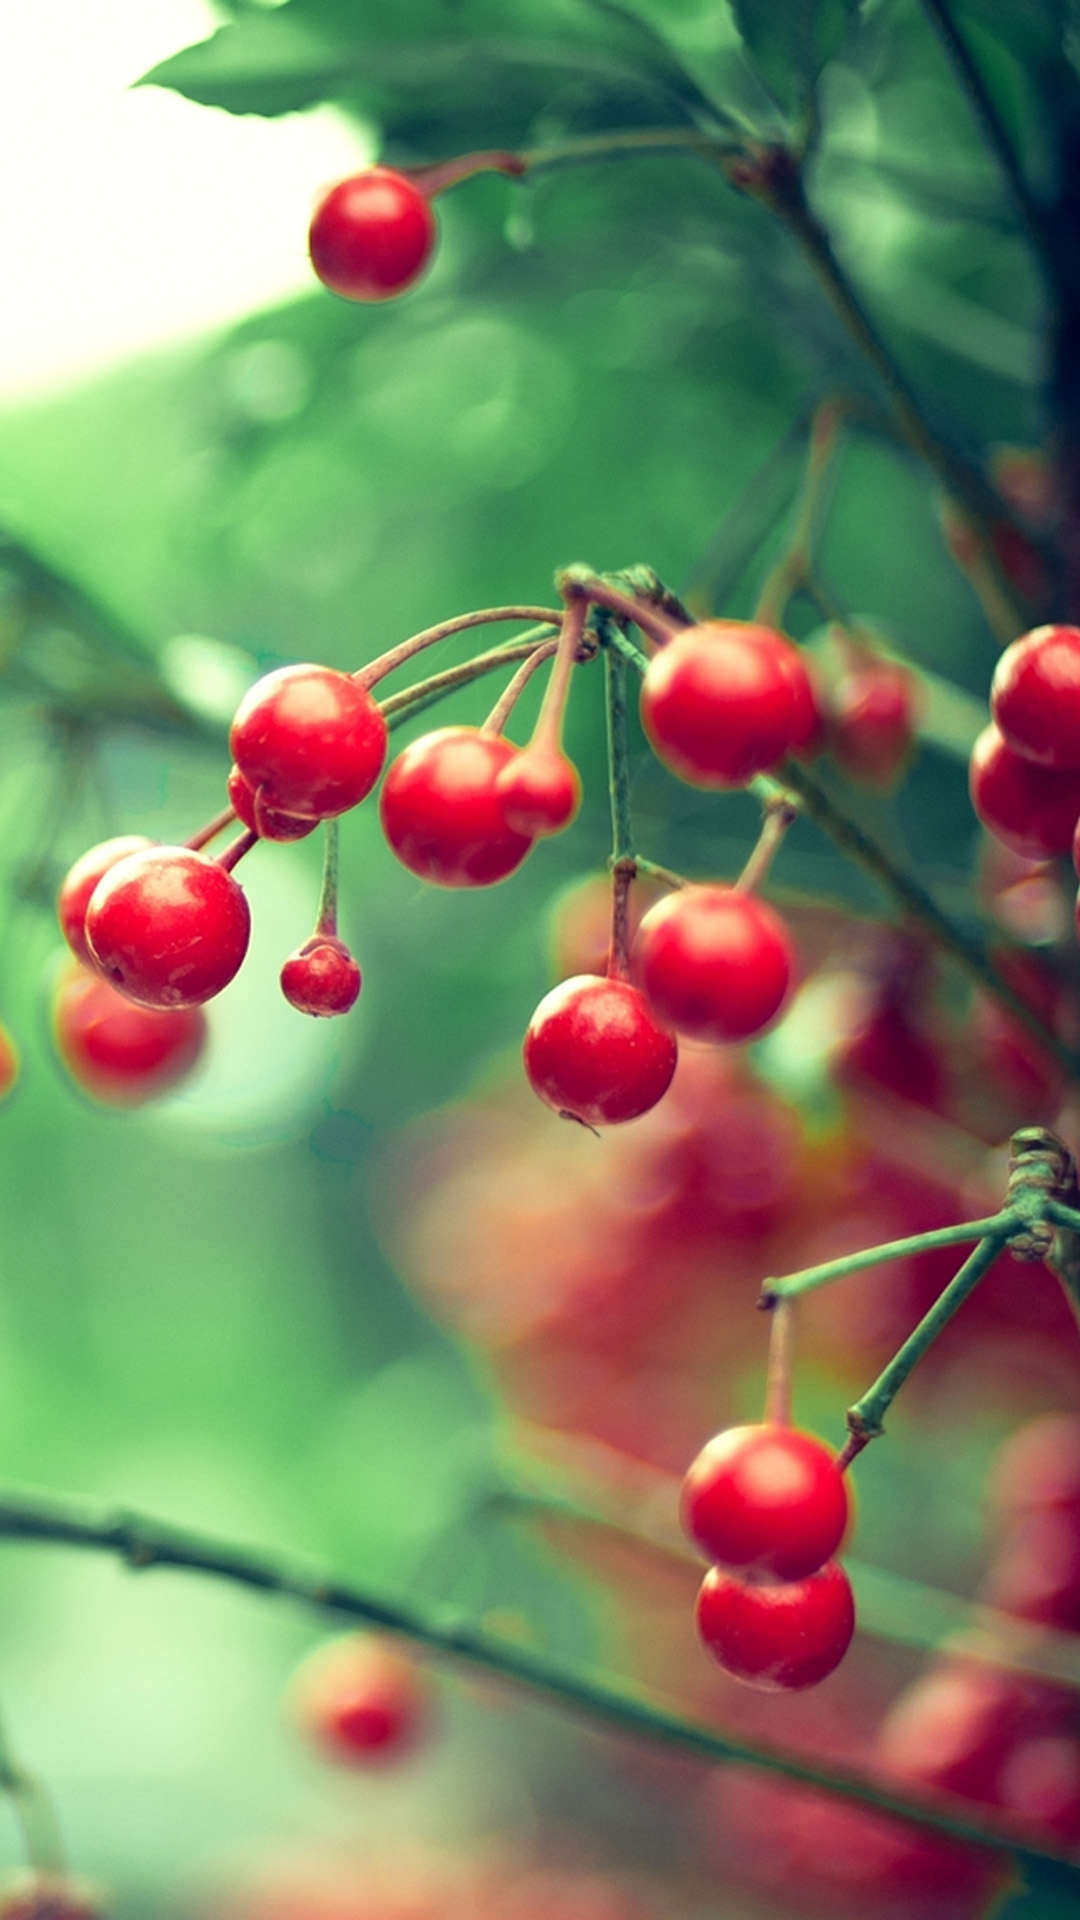 Nature Samsung Galaxy S5 Cherry Smartphone Wallpaper - Hd For Mobile Samsung Galaxy S4 , HD Wallpaper & Backgrounds